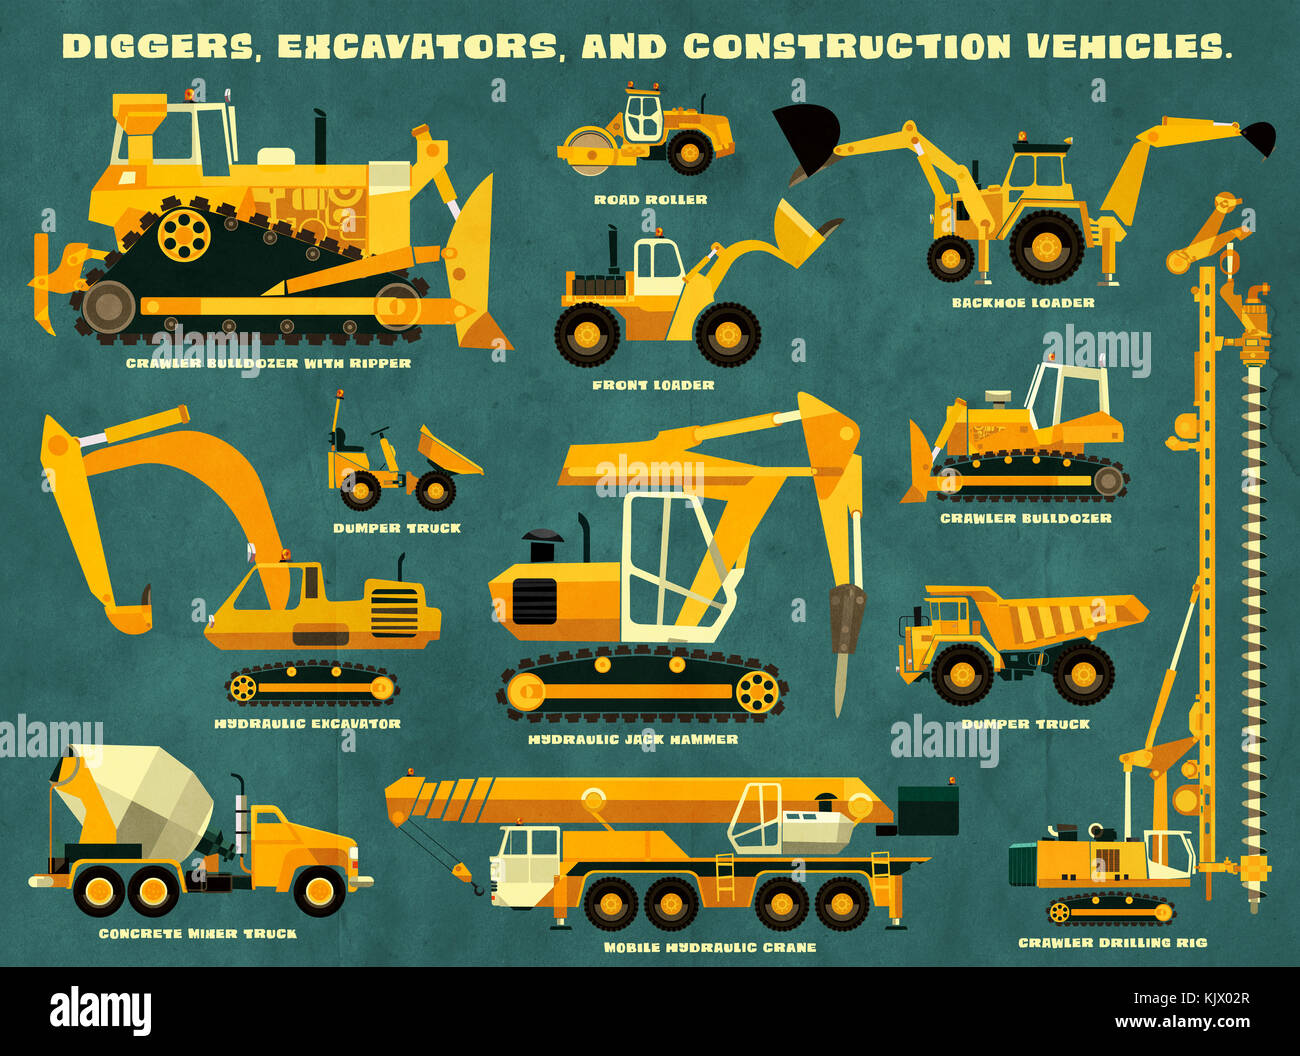 Diggers, excavators and construction vehicles Stock Photo